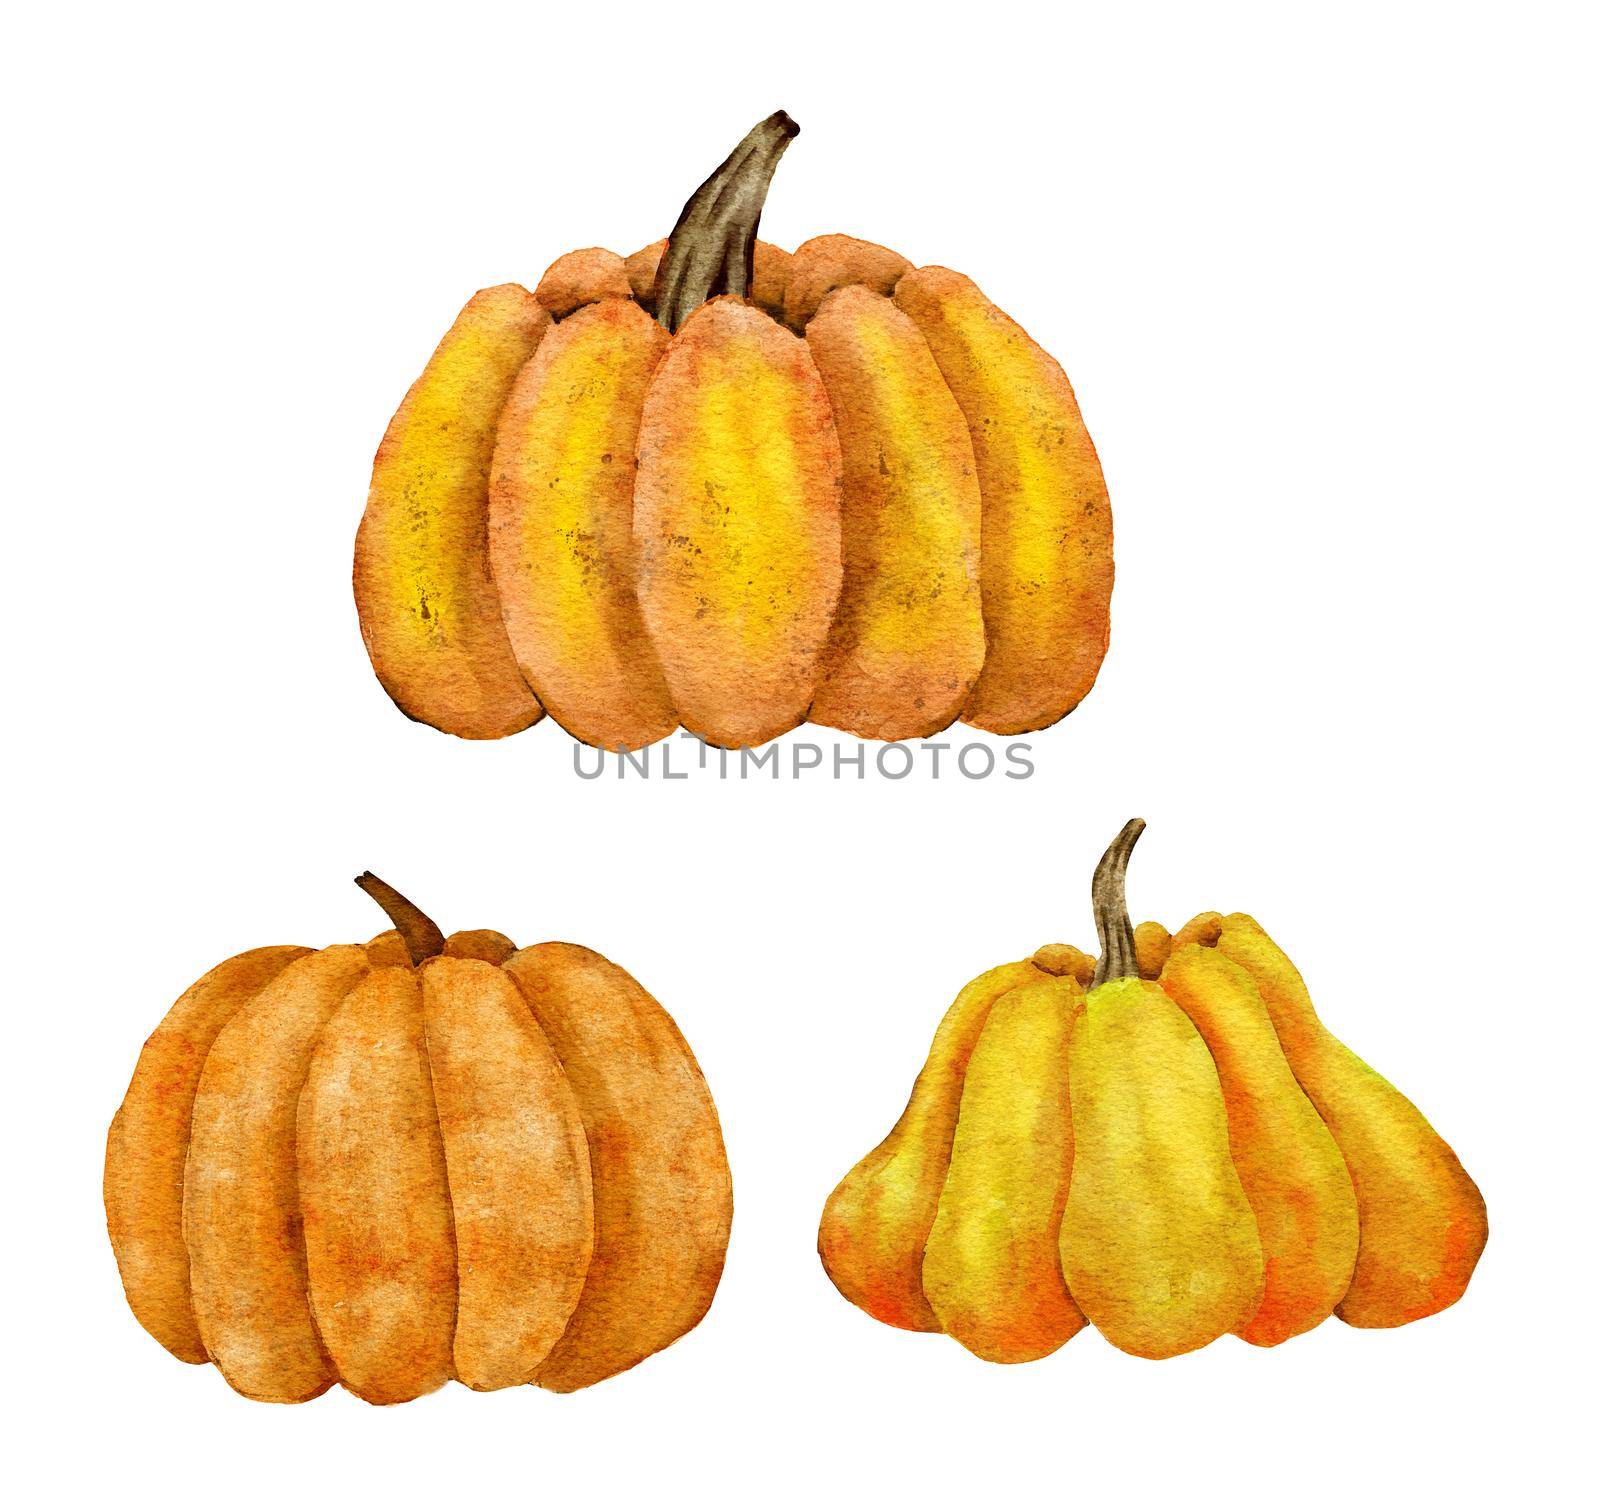 Watercolor hand drawn illustrations of orange yellow pumpkins, fall autumn organic food vegetable. Thanksgiving Halloween clipart for party invitation celebration decor. by Lagmar